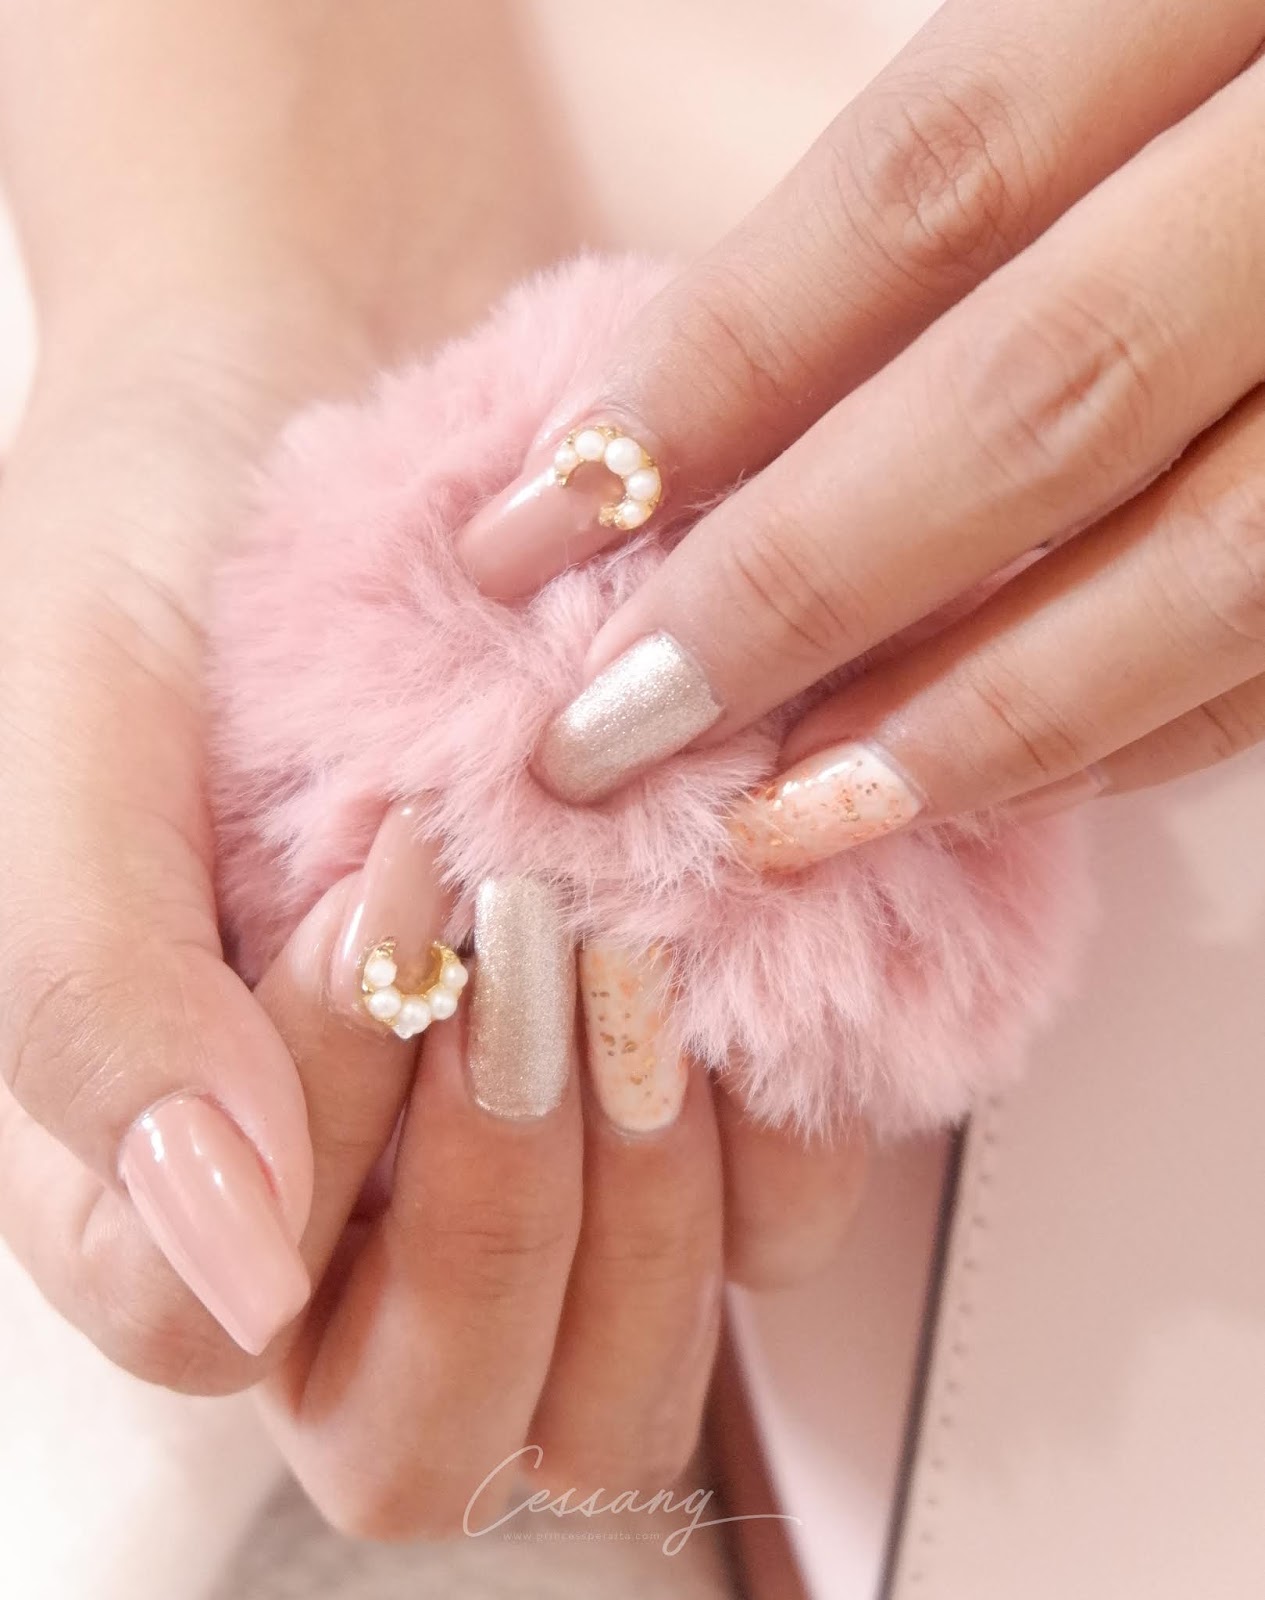 CESSANG NAIL ART COLLECTION - MOON GLITTER NUDE PINK GEL MANICURE